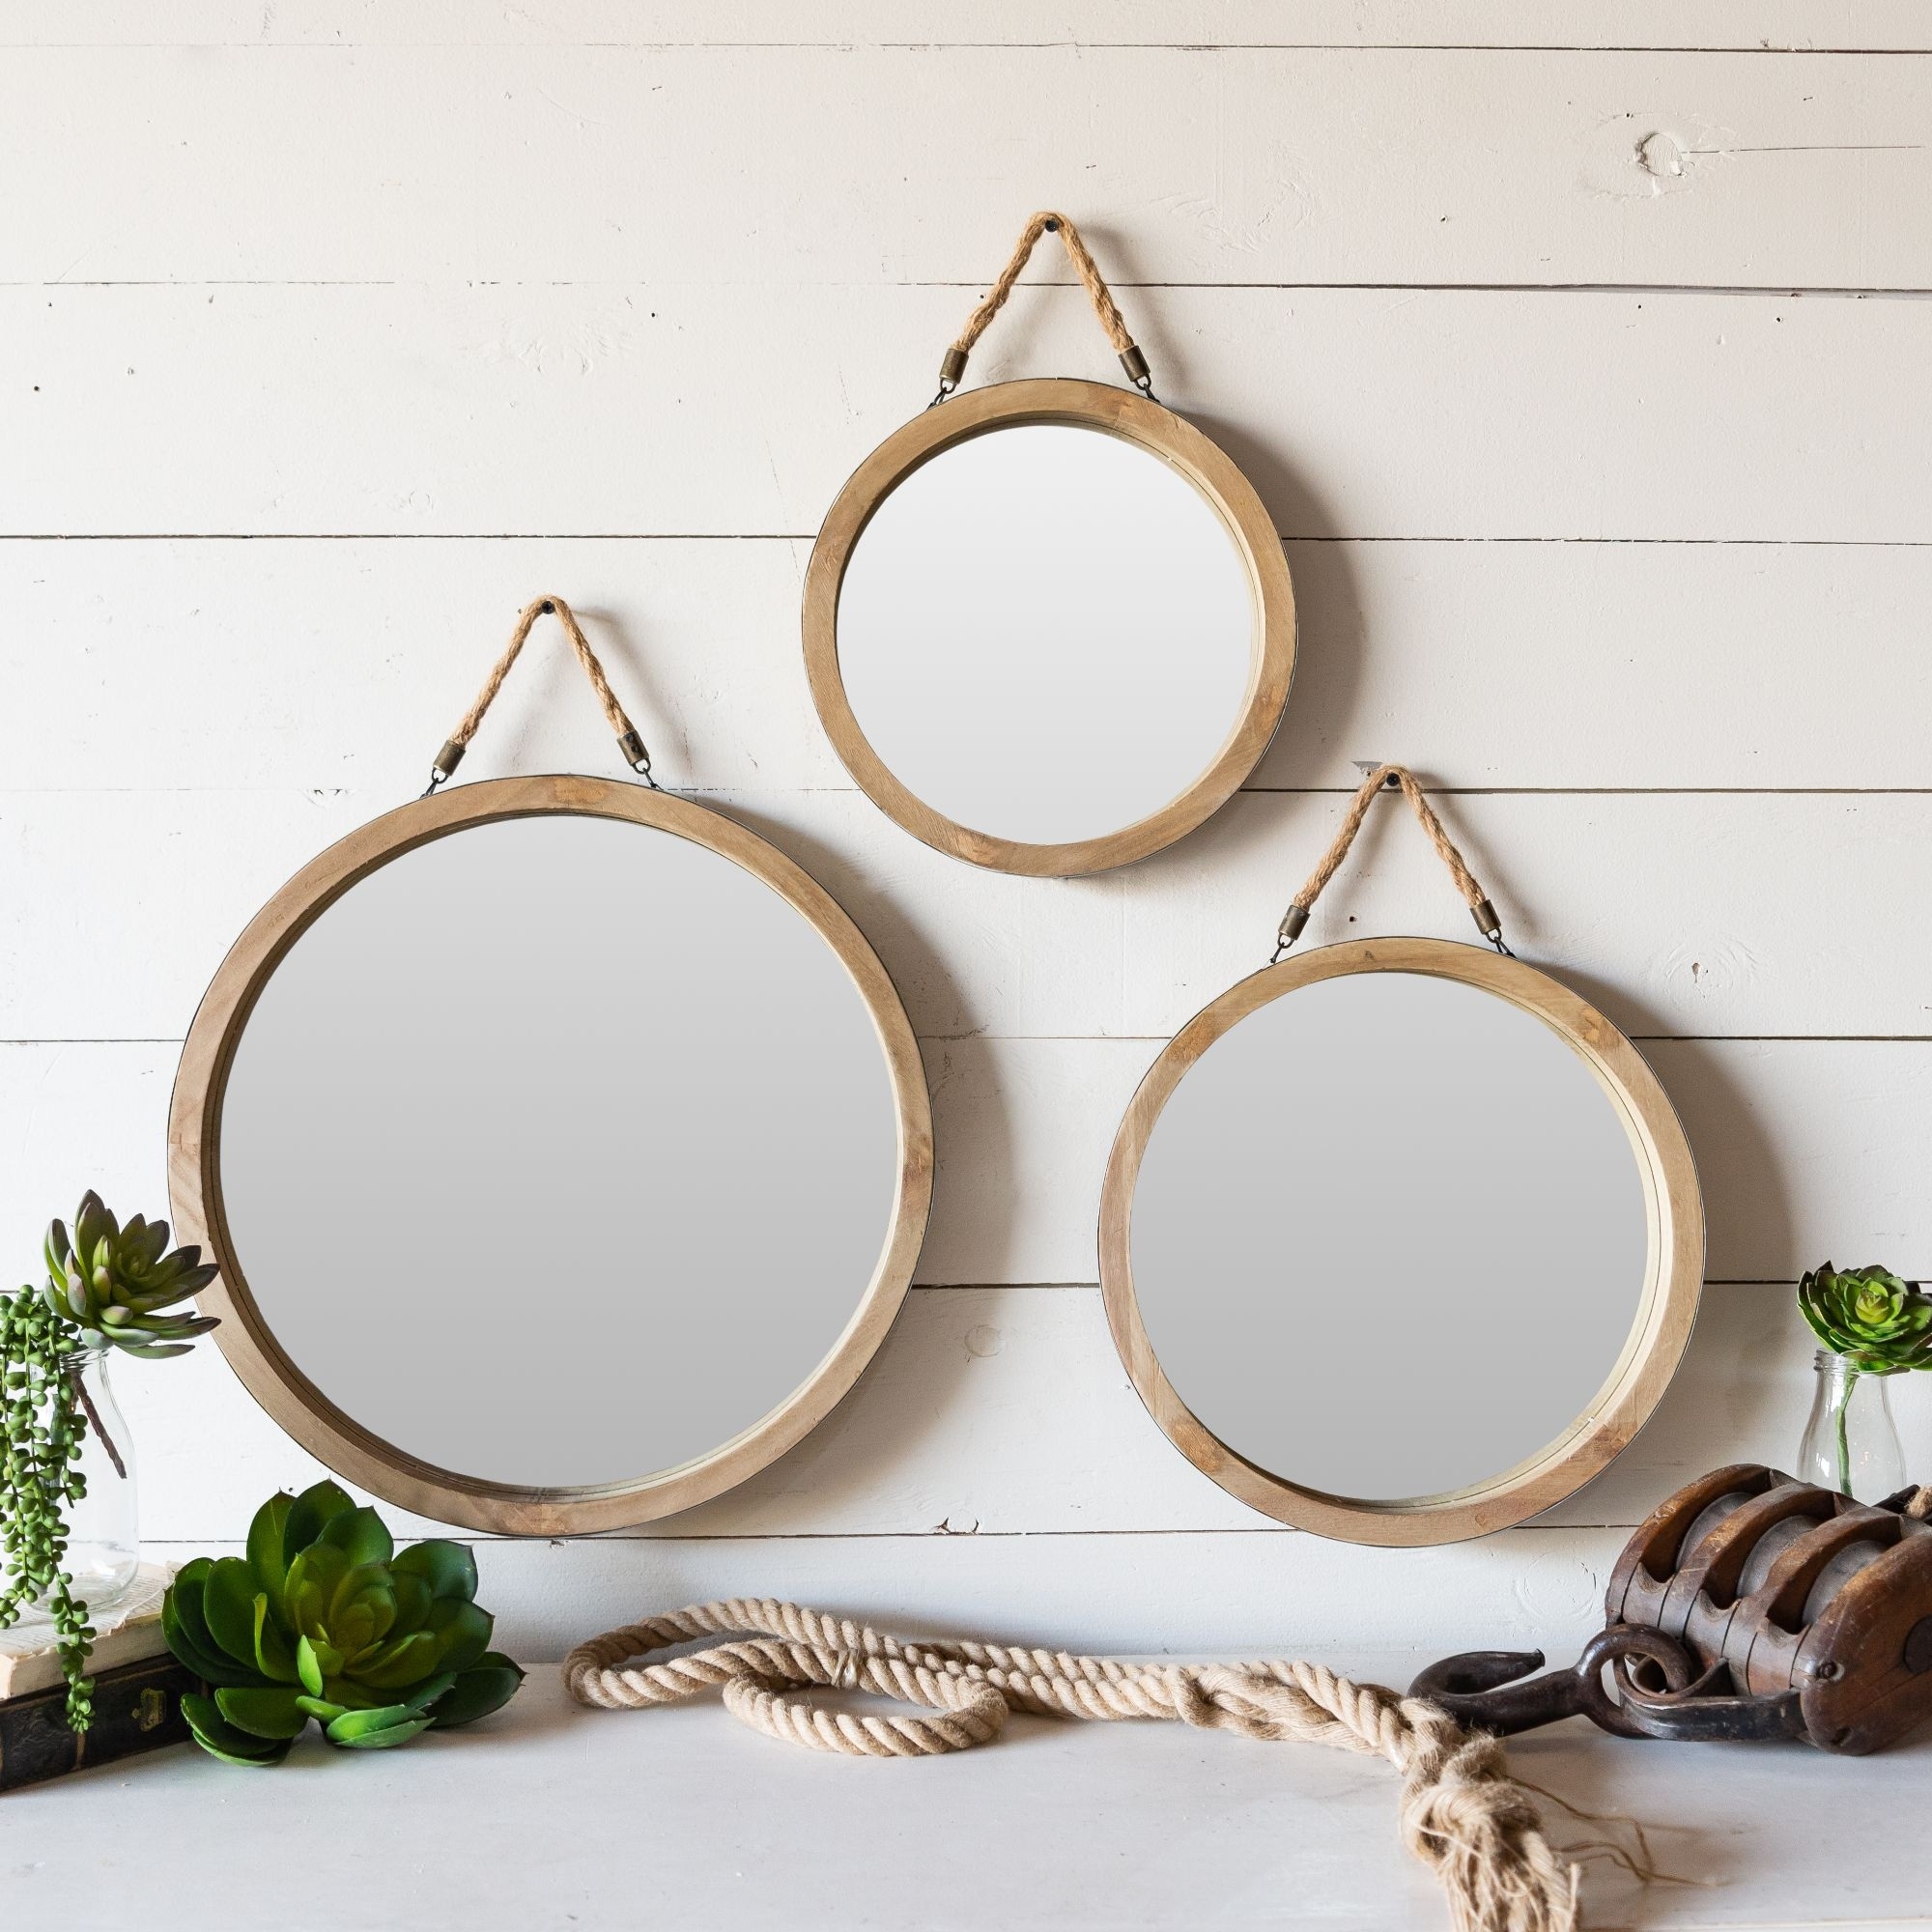 Set of 3 Beige Wooden Framed Beveled Round Wall Mirrors 17.75"